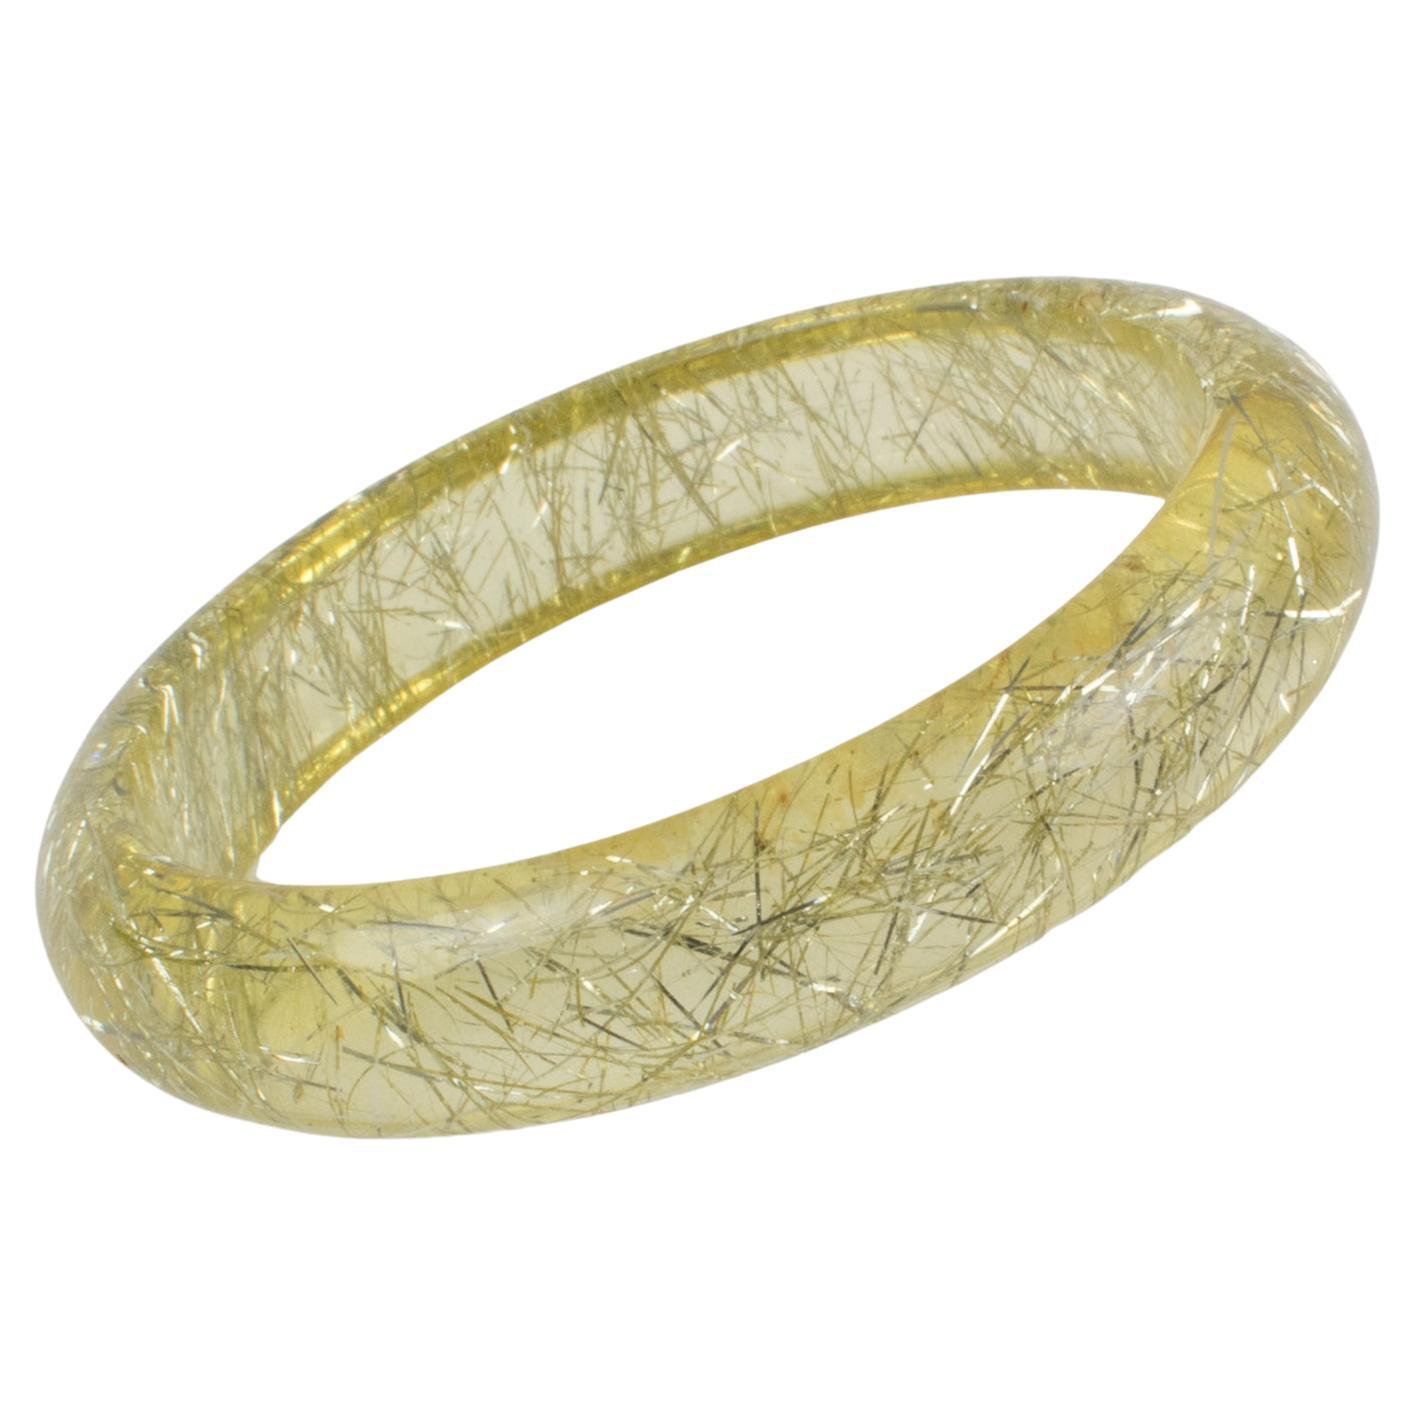 Lucite Bracelet Bangle Yellow Lemon with Silver Metallic Thread Inclusions For Sale